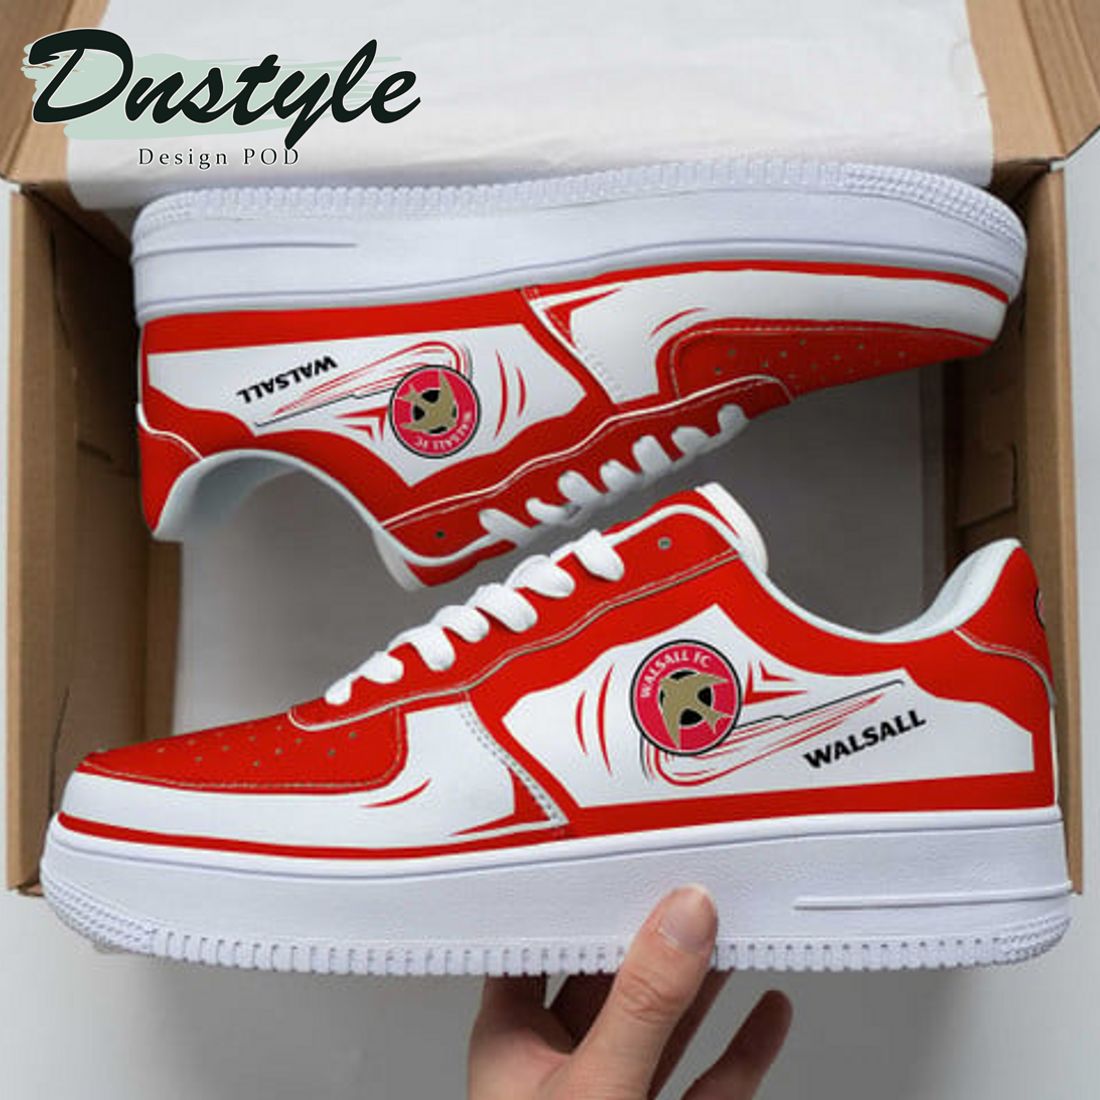 Walsall FC EFL Championship Nike Air Force 1 Sneakers